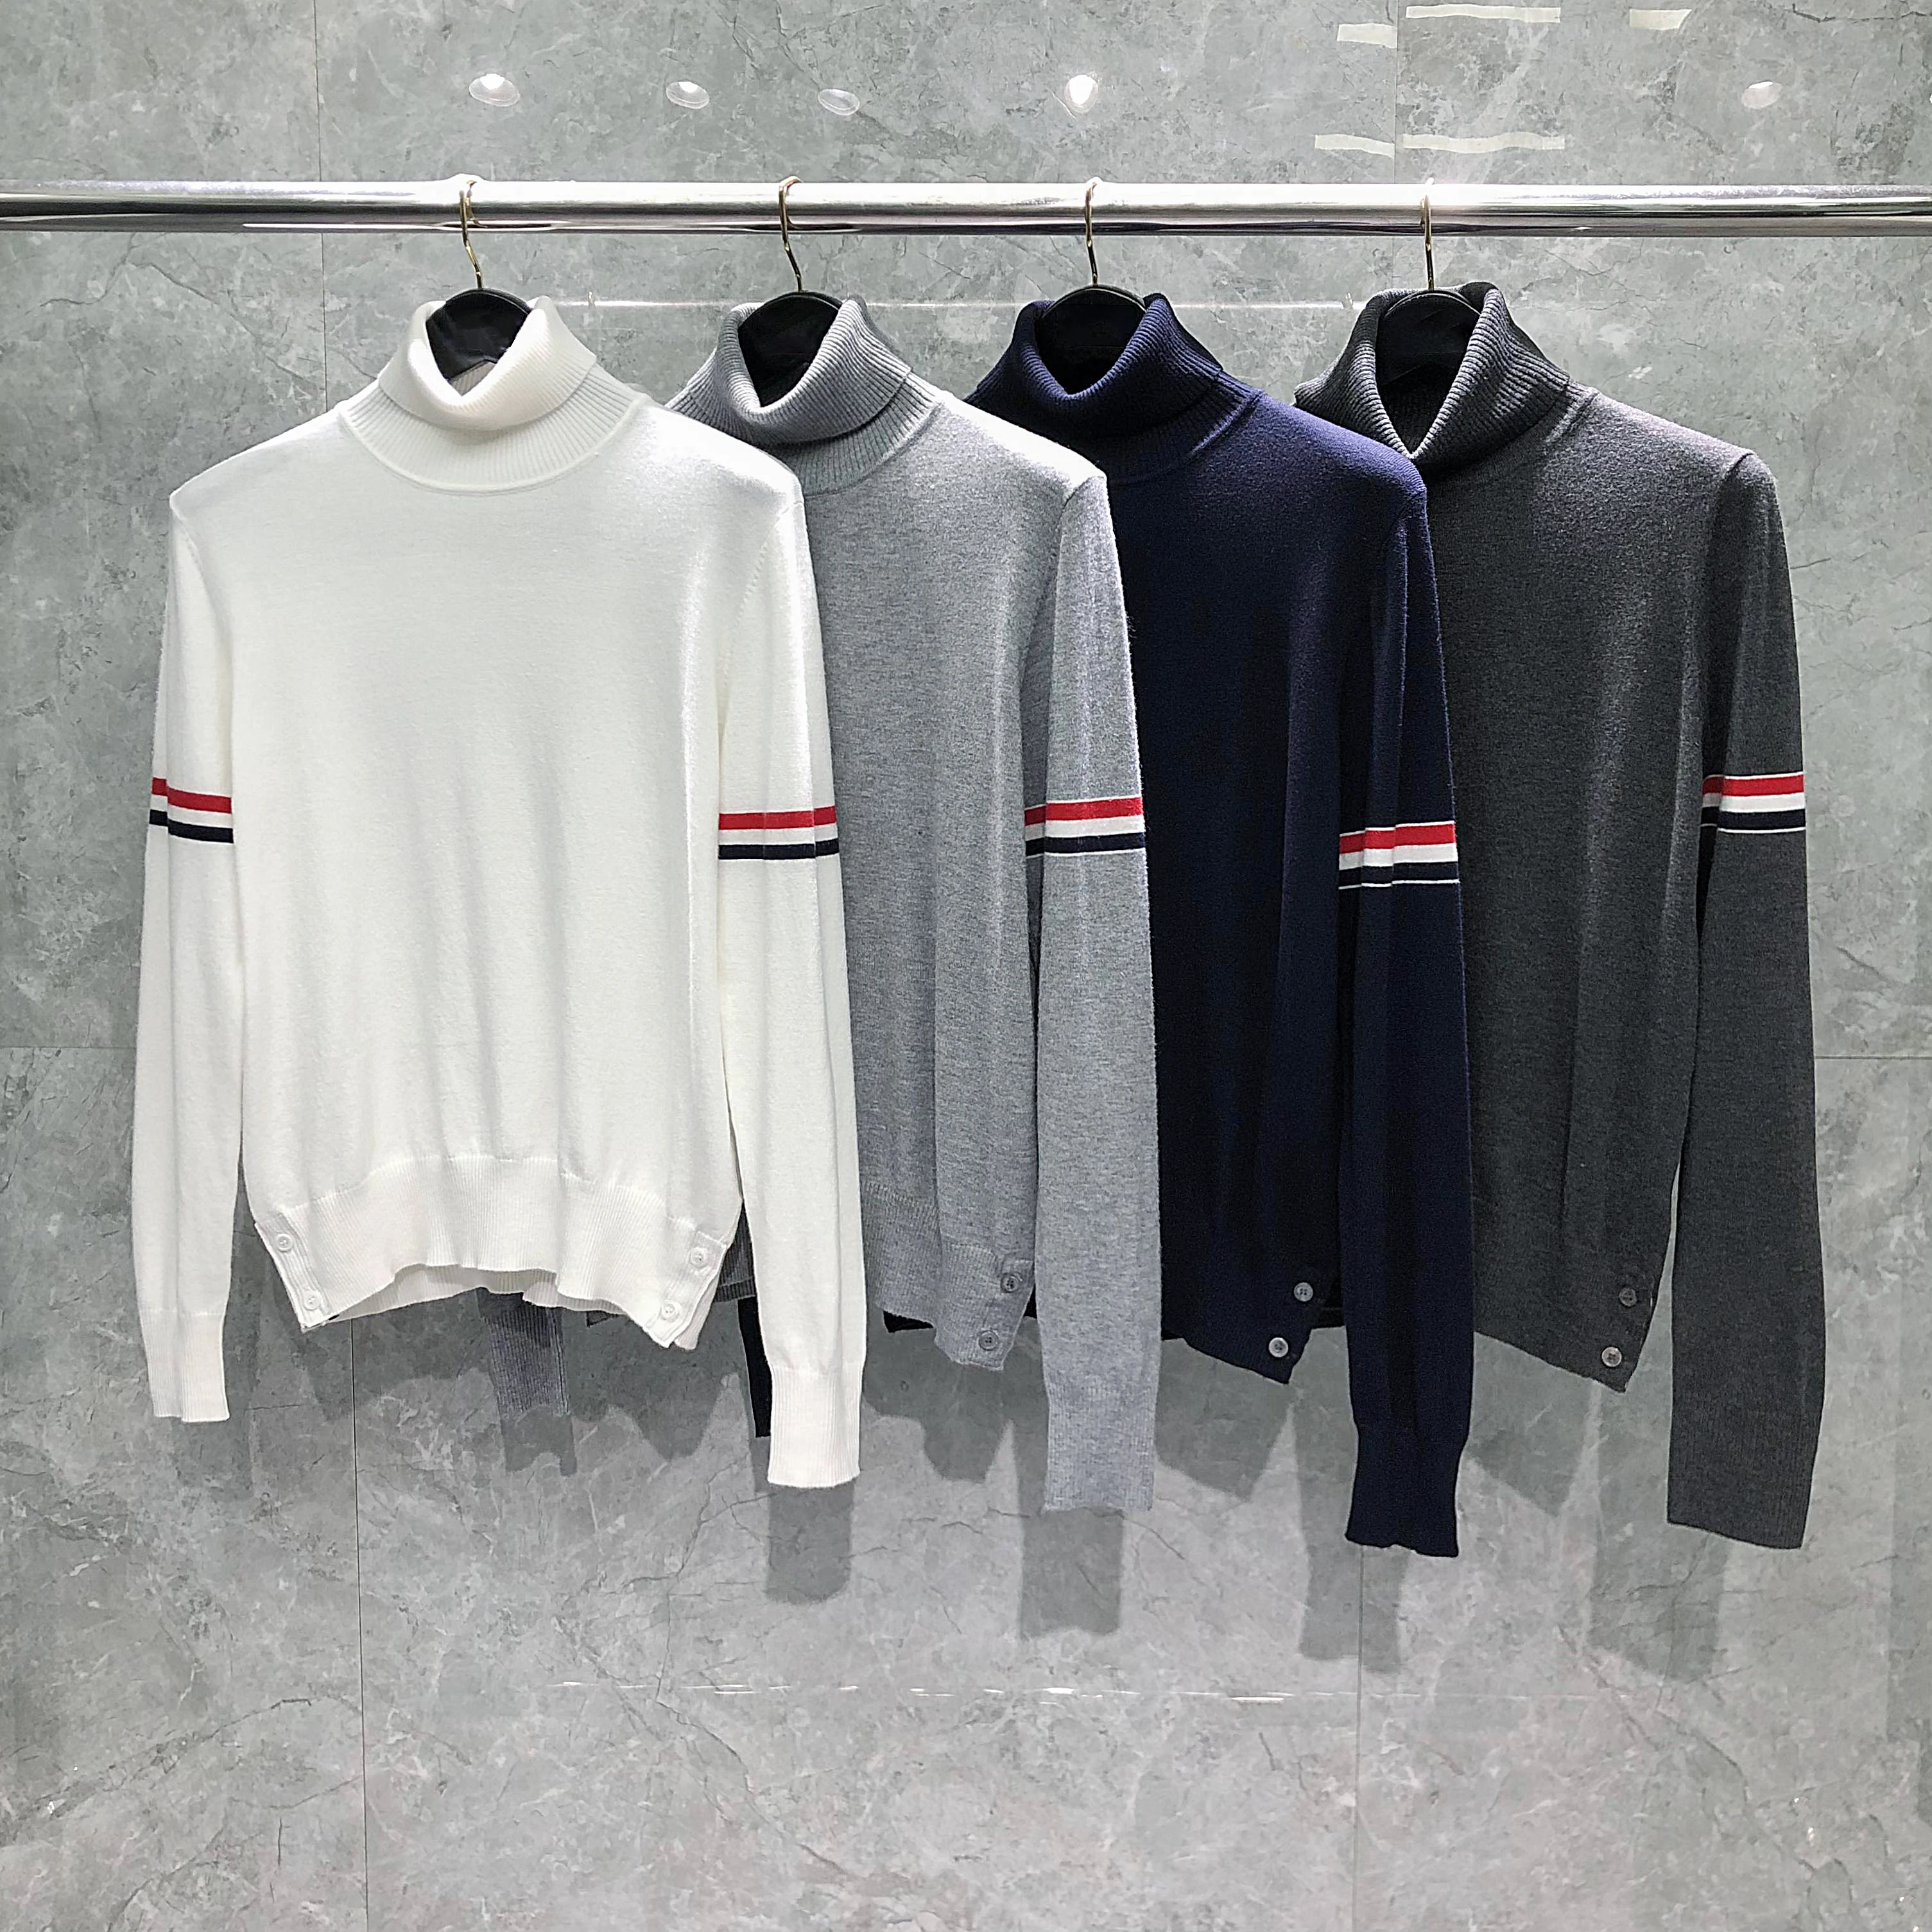 TB THOM Men's Sweaters 2023 Classic Korean Fashion Brand Sweaters Double Armband Stripes Turtleneck Pullovers Casual Solid Tops